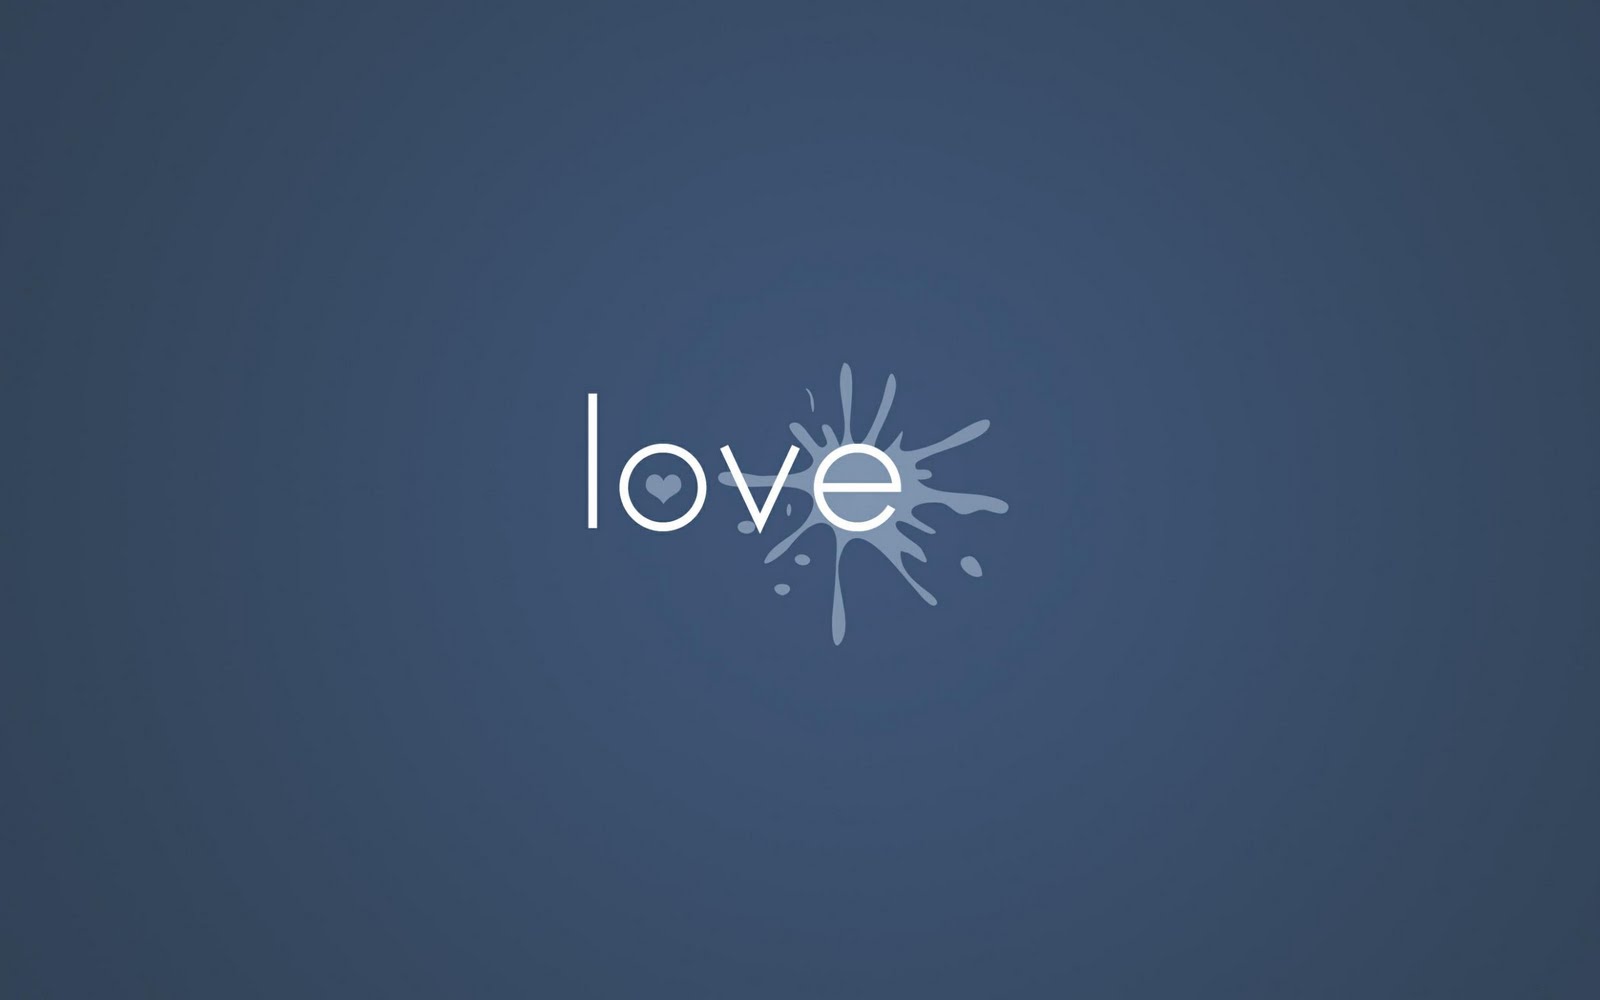 Pure Love Blue Backgroun Full HD Wallpaper Is A Great For